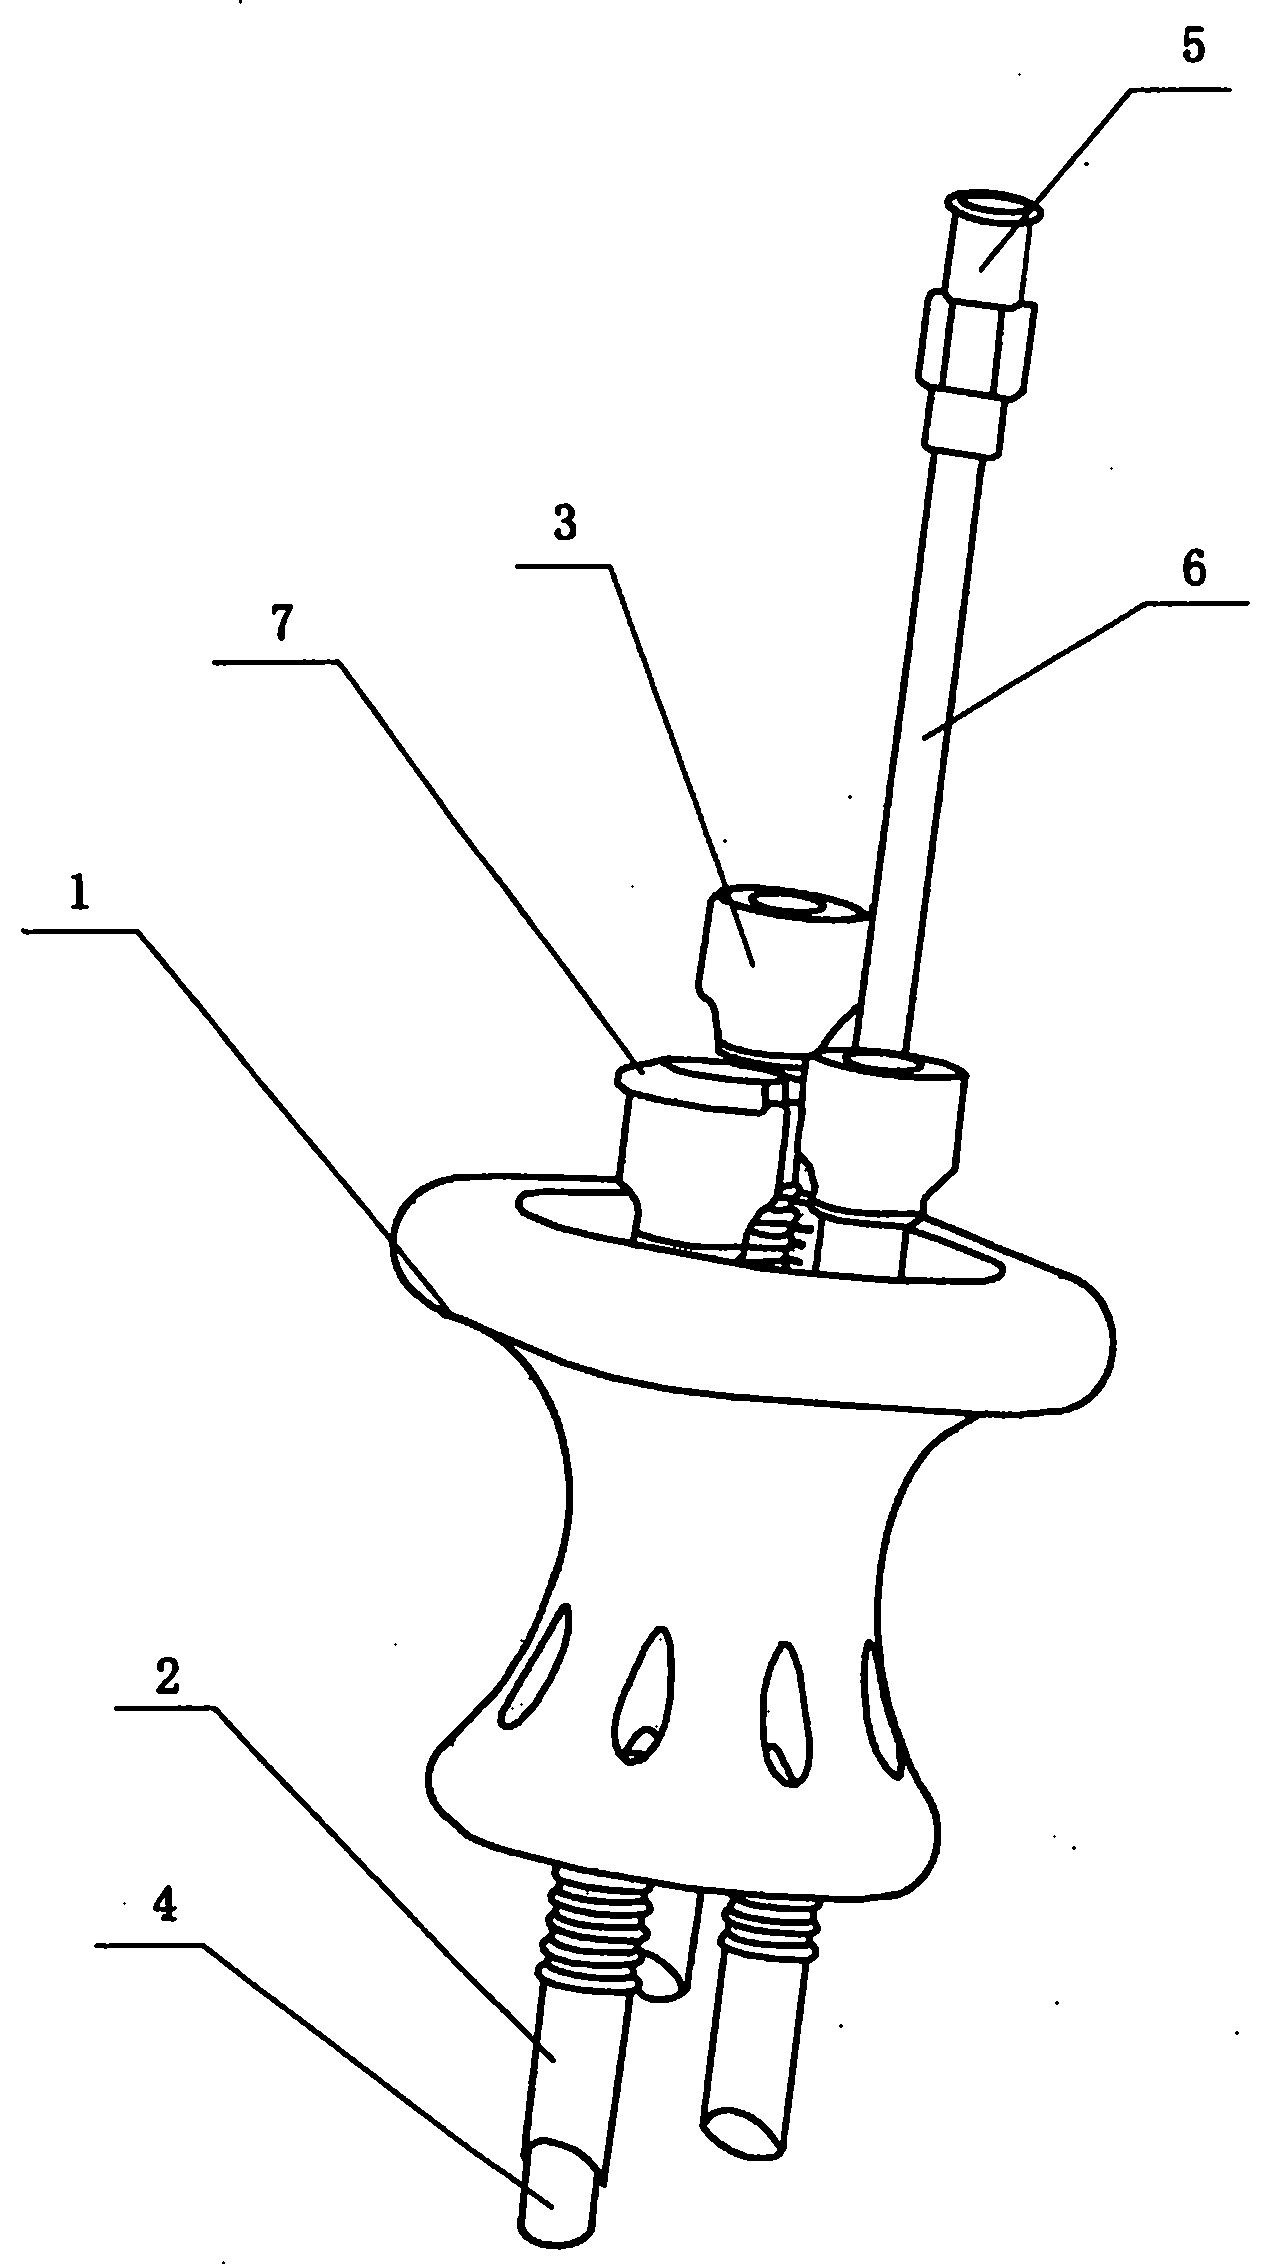 Bracket for single-incision abdominal cavity operation